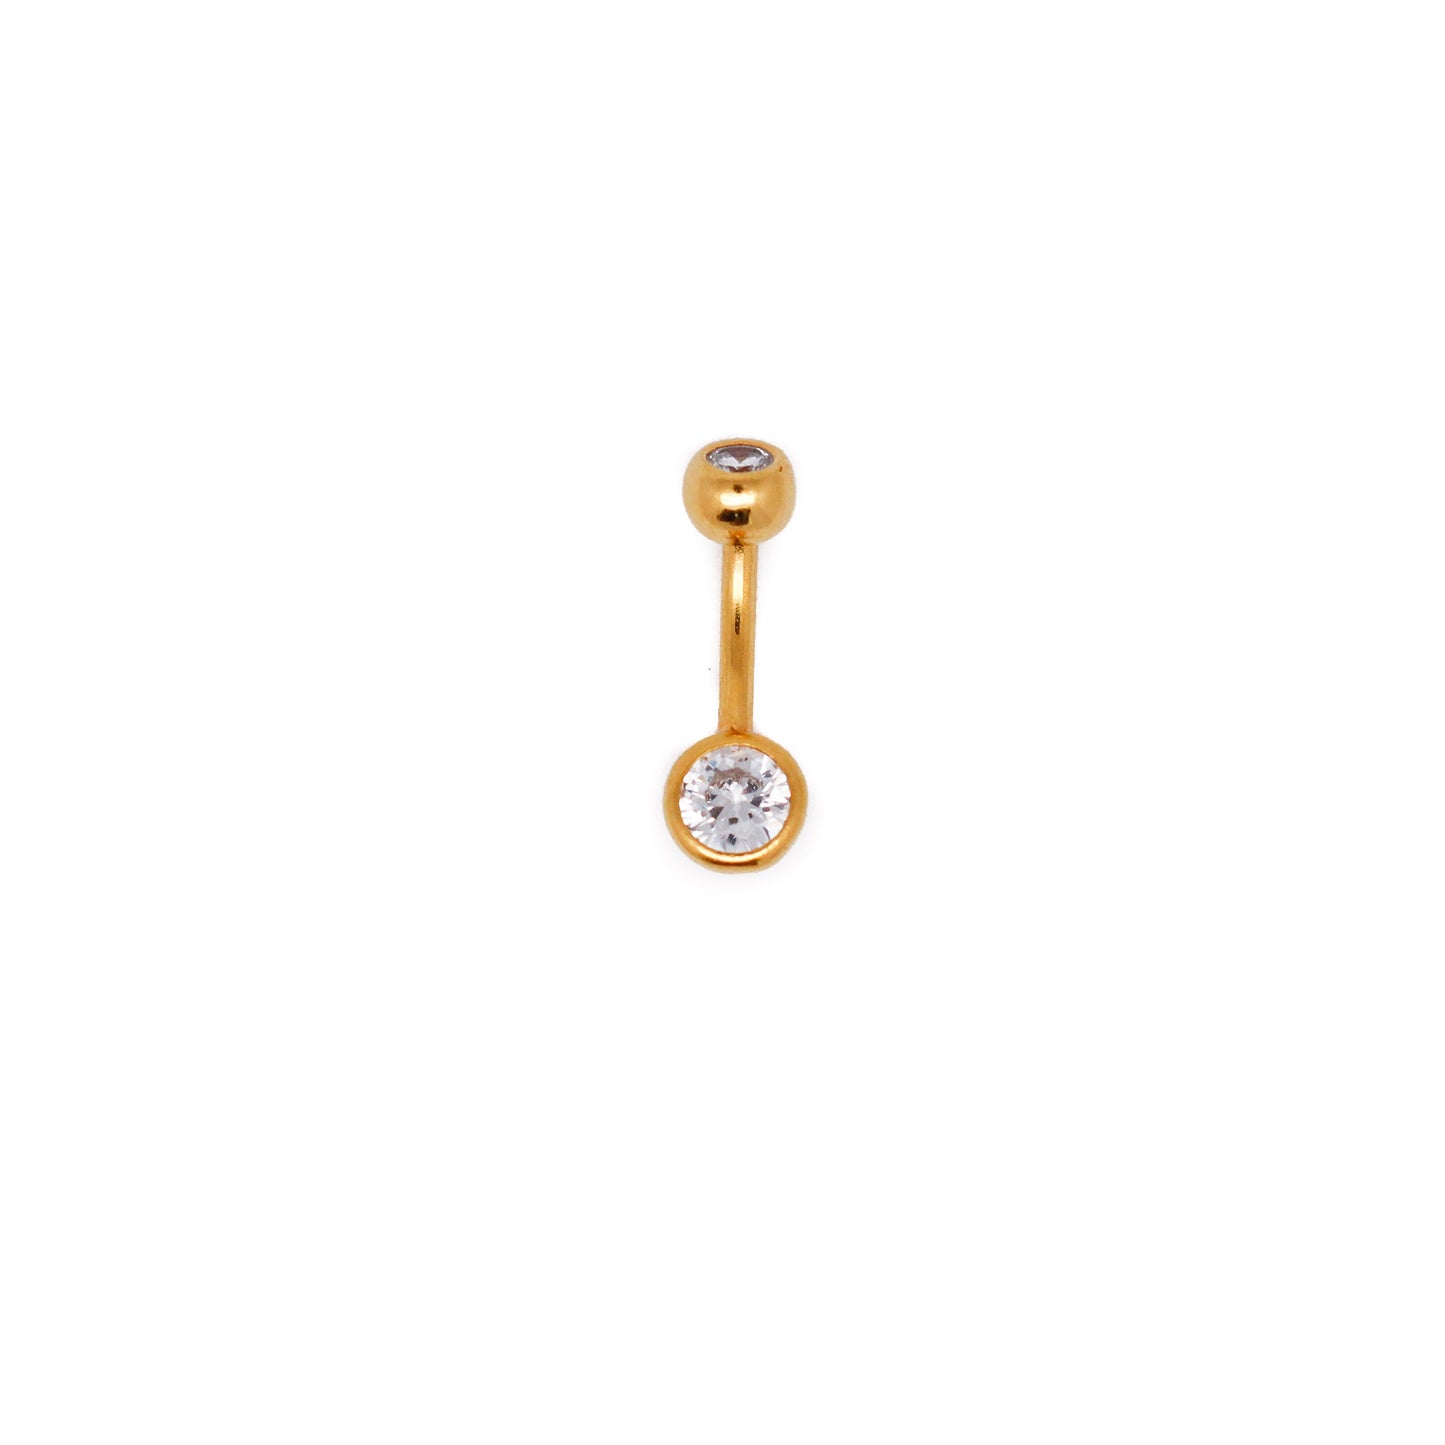 Vermeil | 24k Gold Coated 925 Silver Small Belly Ring with Sparkling Cubic Zirconia Crystals | 6mm 1/4" 8mm 5/16" 10mm 3/8" - Sturdy South